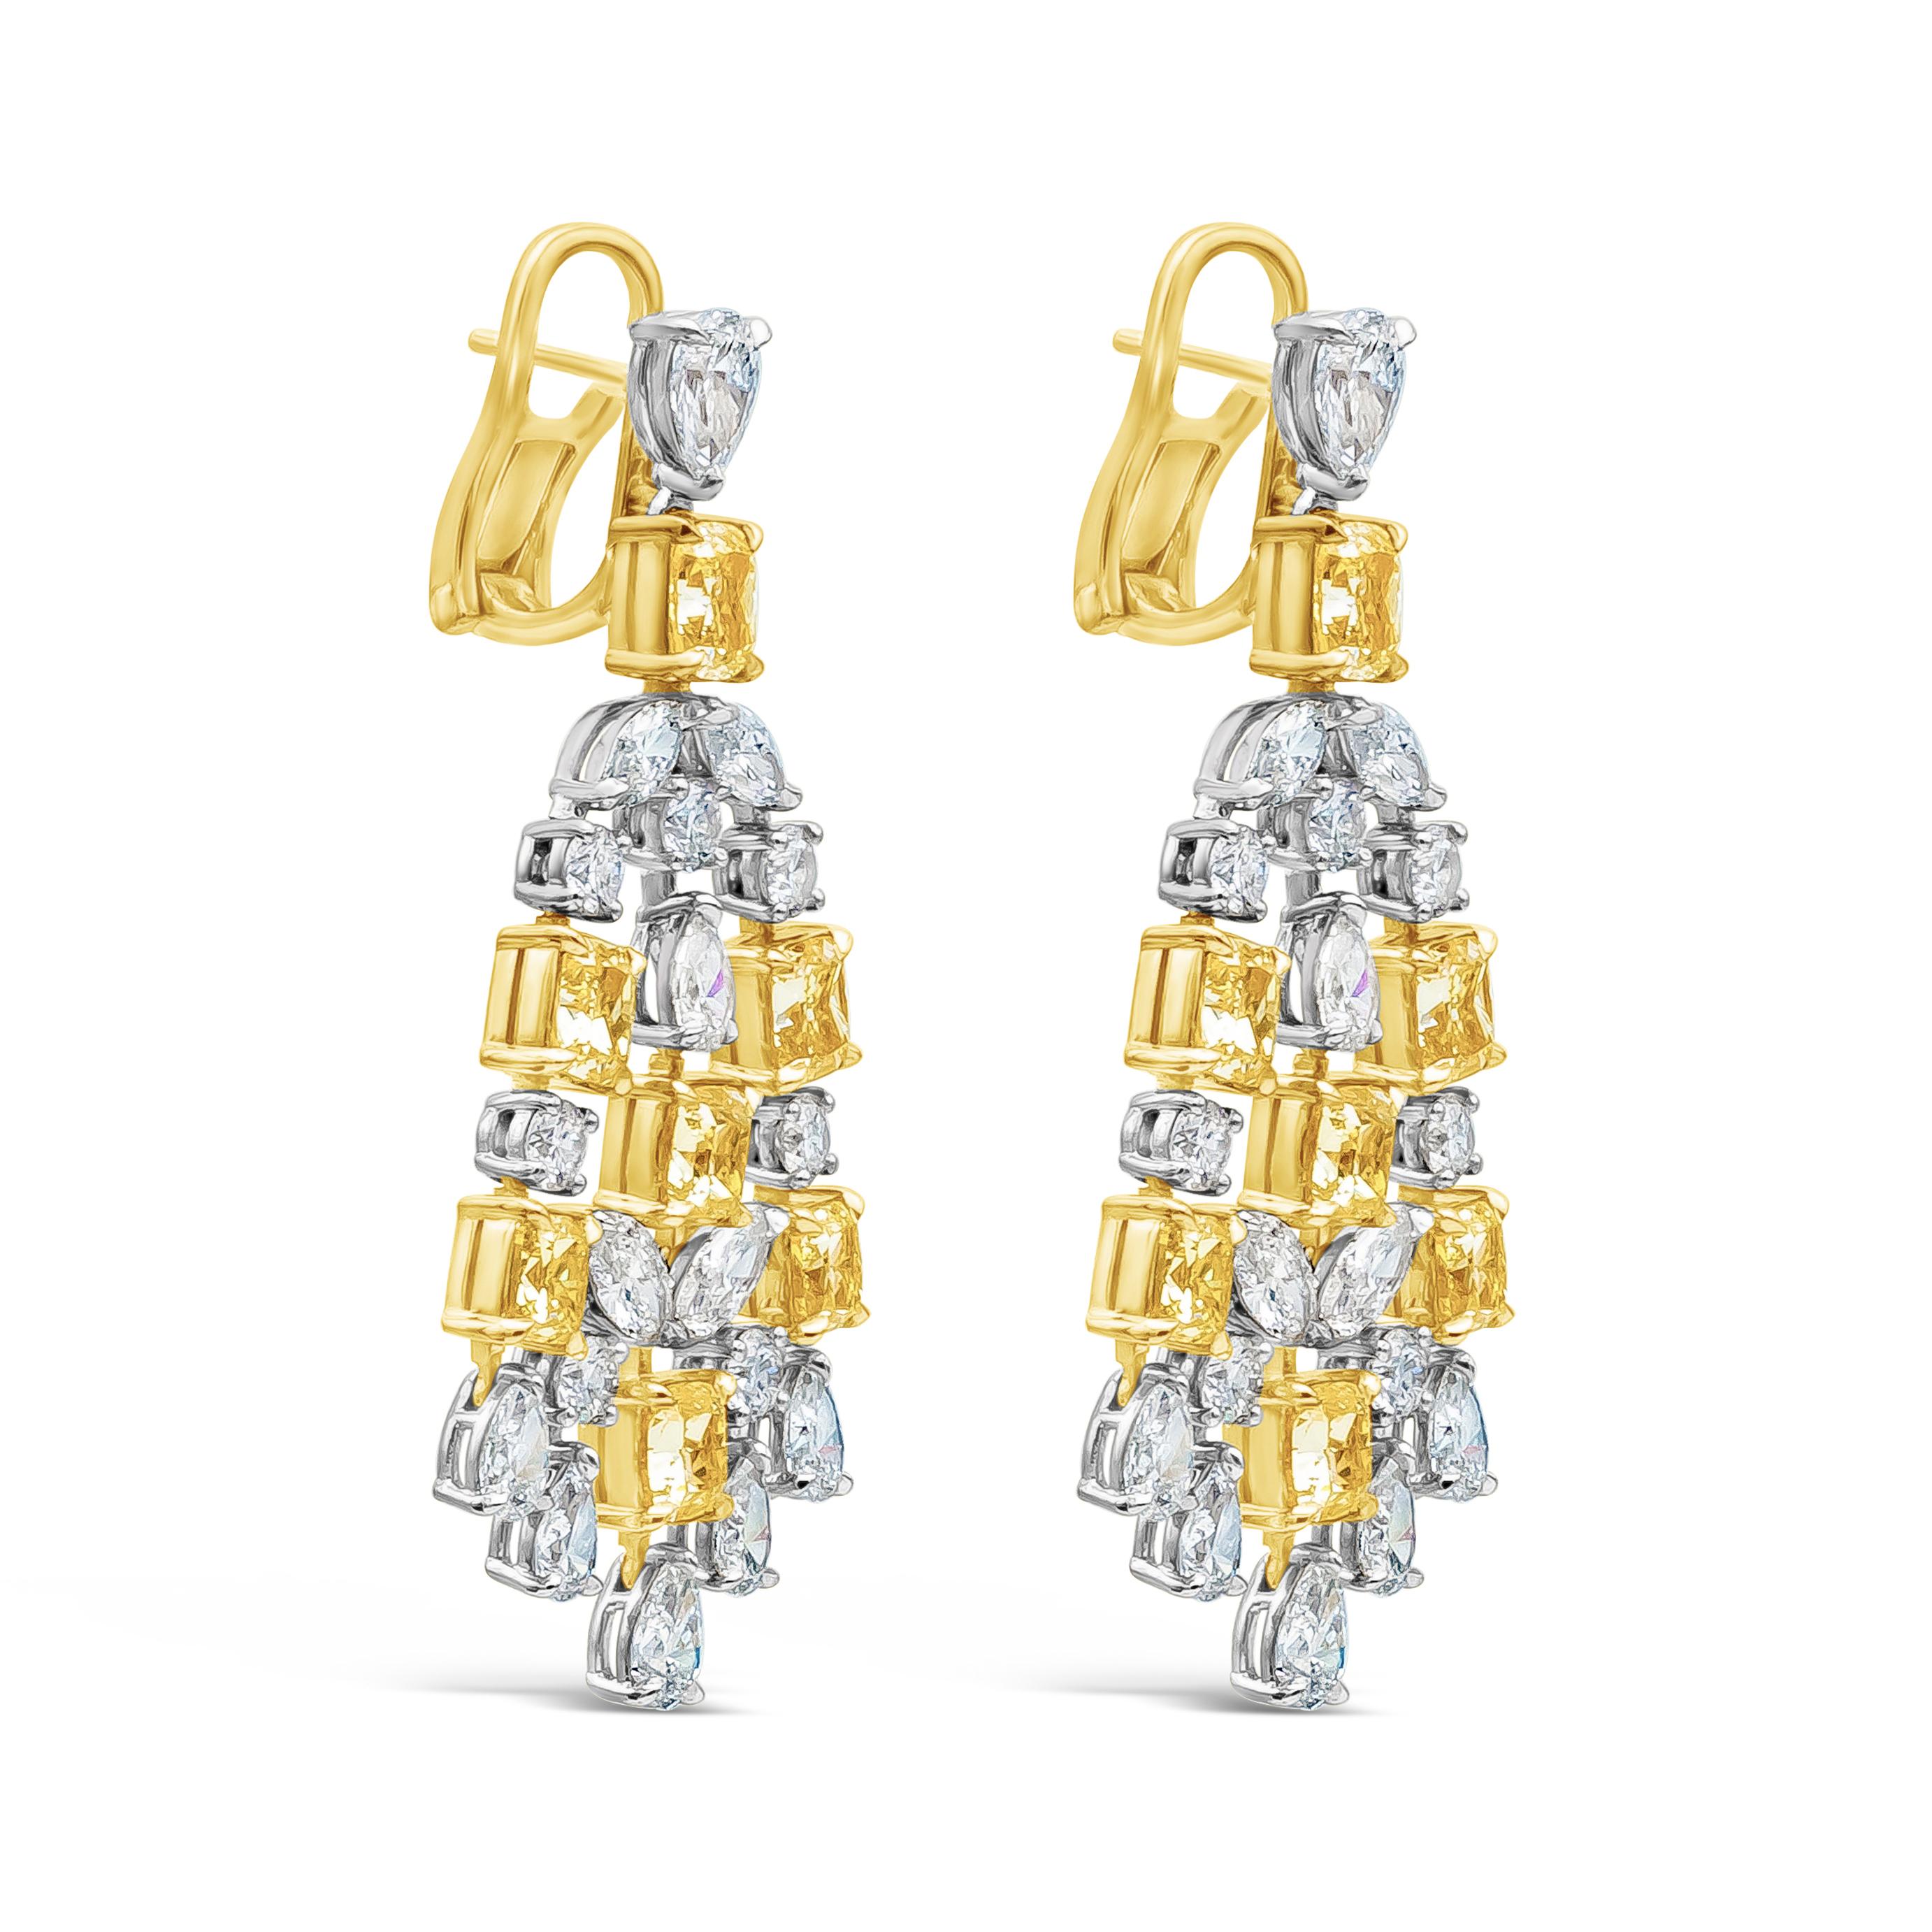 A brilliant piece of high-end chandelier earrings showcasing 14 cushion cut fancy yellow diamonds set in four prong 18k yellow gold, weighing 9.29 carat total, VS in Clarity. Accented by 36 pieces of mixed cut diamonds set in platinum, weighing 7.27